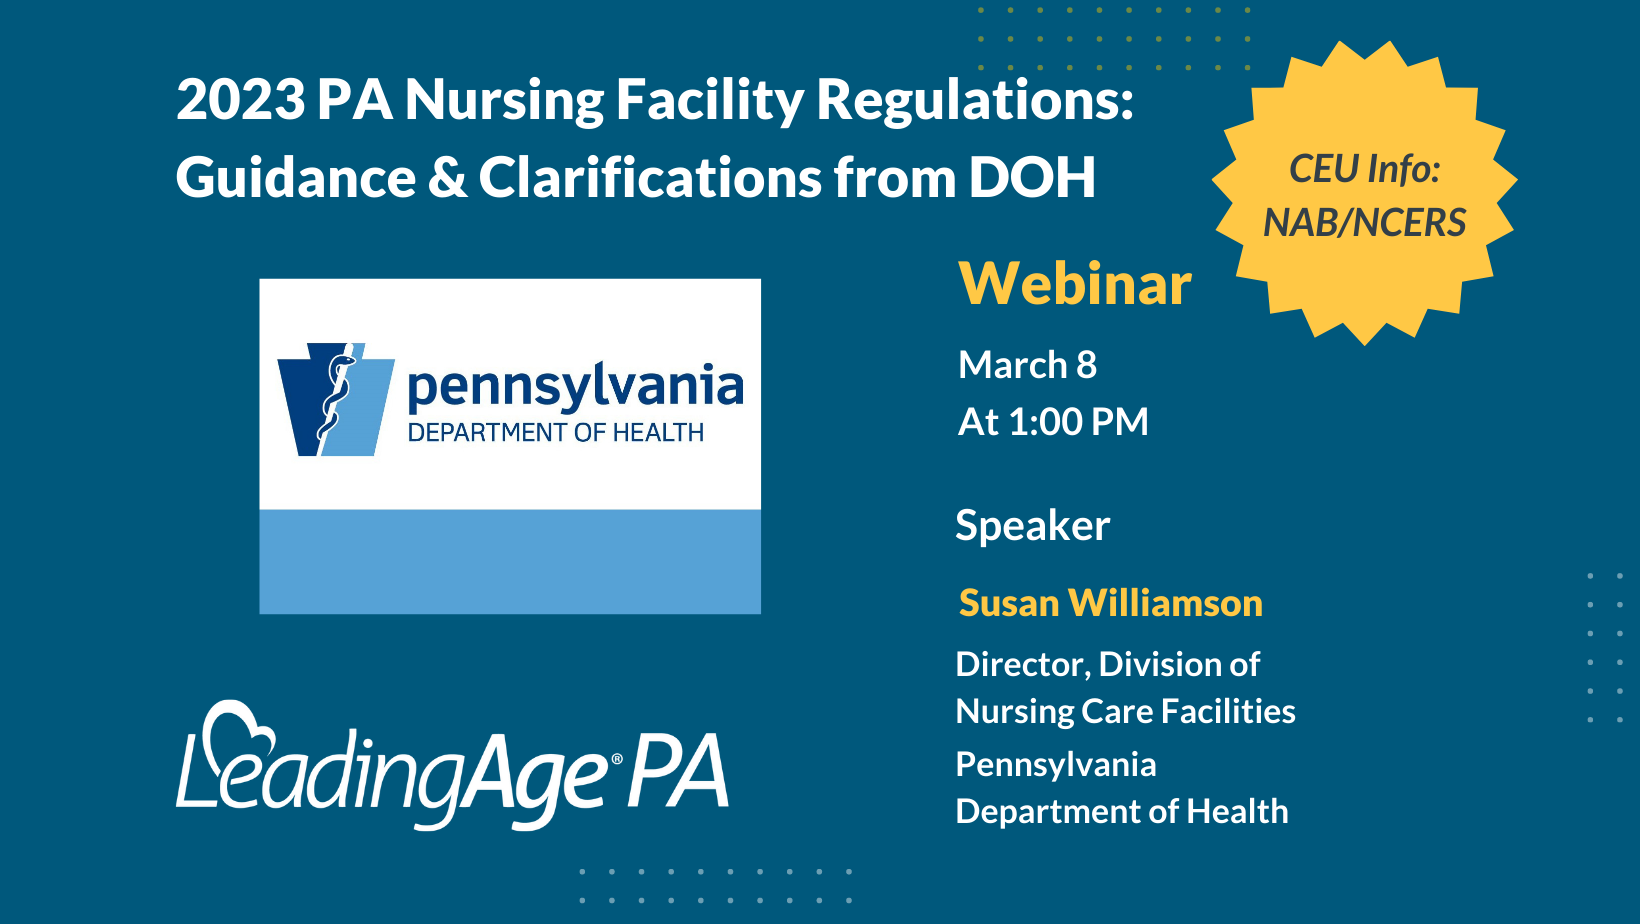 2023 PA Nursing Facility Regulations Guidance & Clarifications from